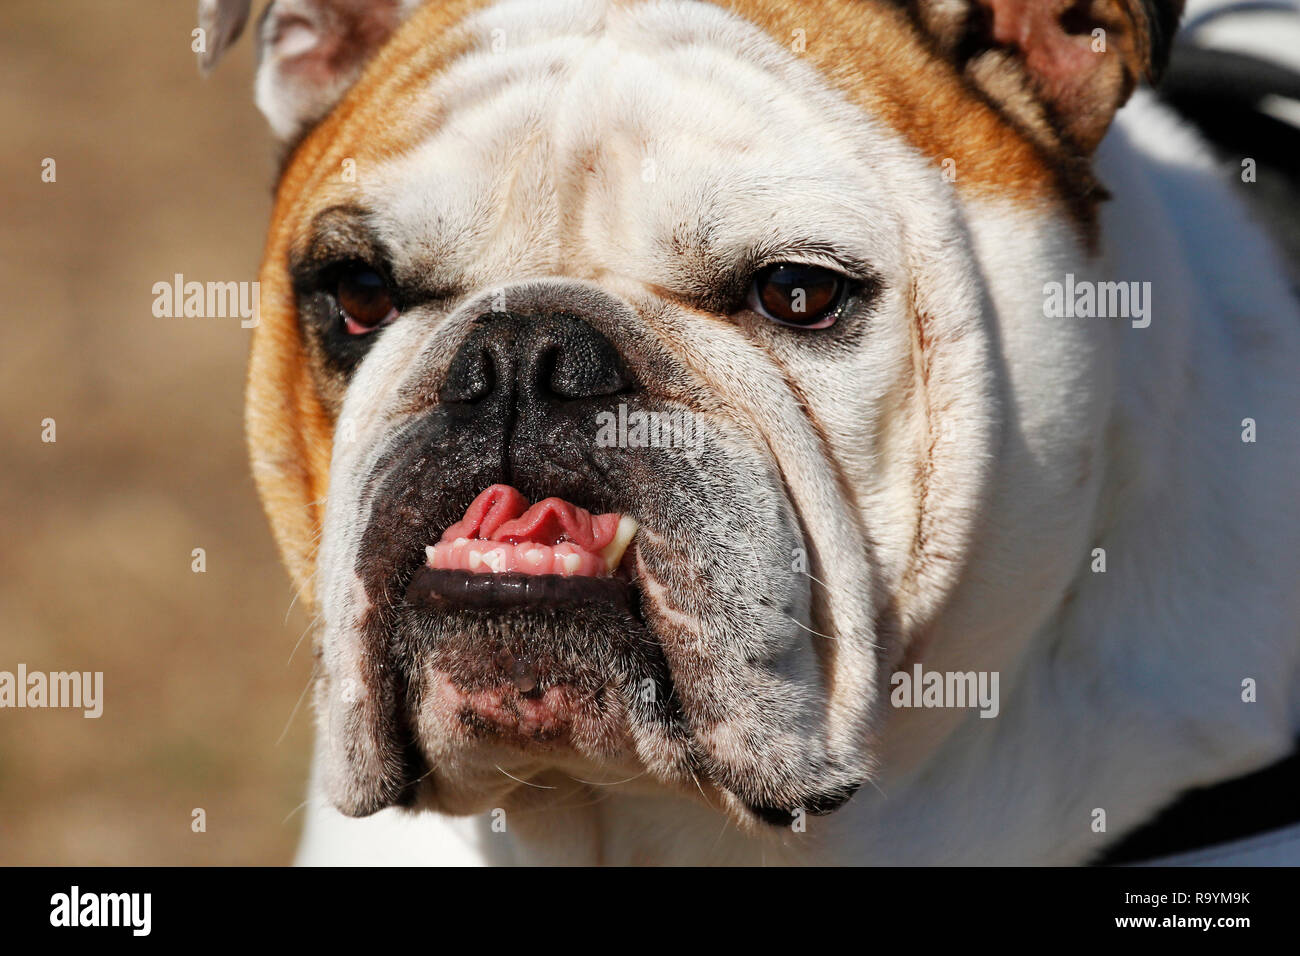 A British bulldog showing its characteristic pushed-in nose face. Stock Photo